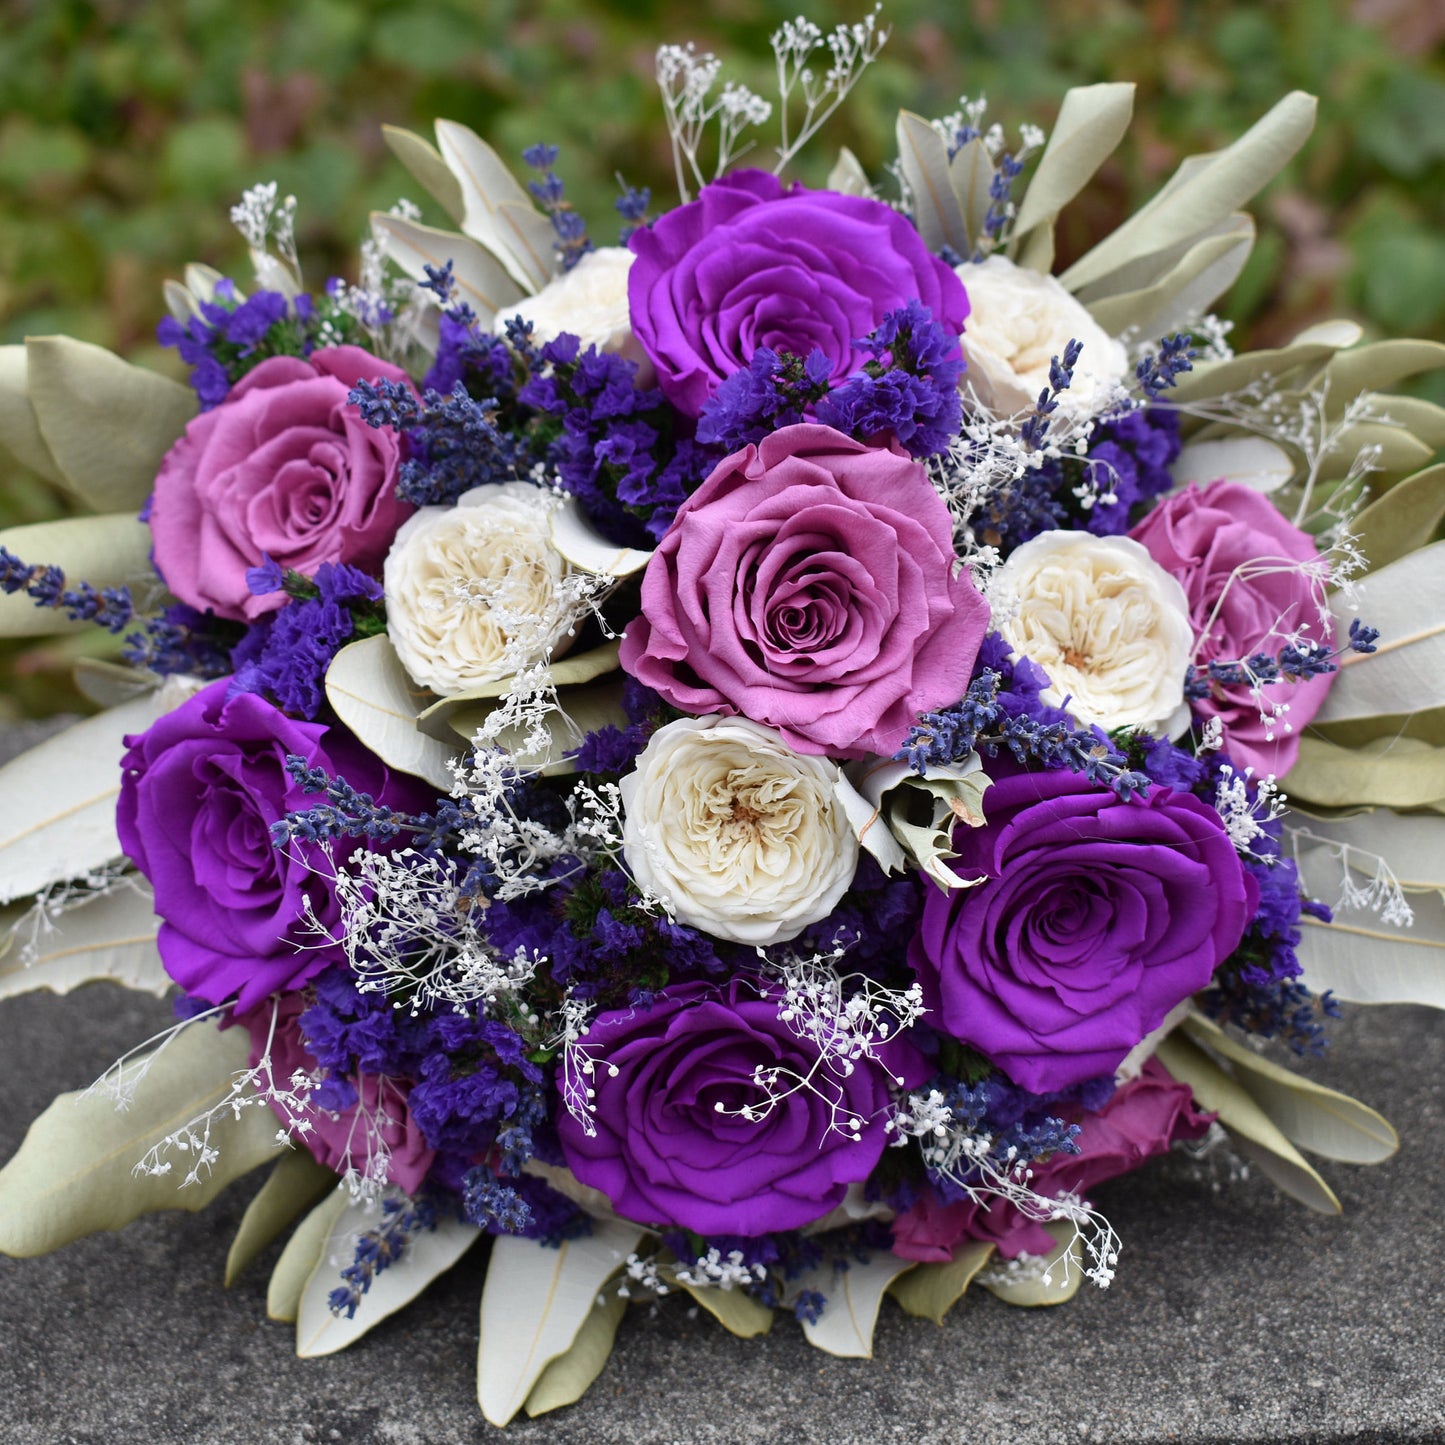 Forget Me Not Real Rose Flower Bouquet